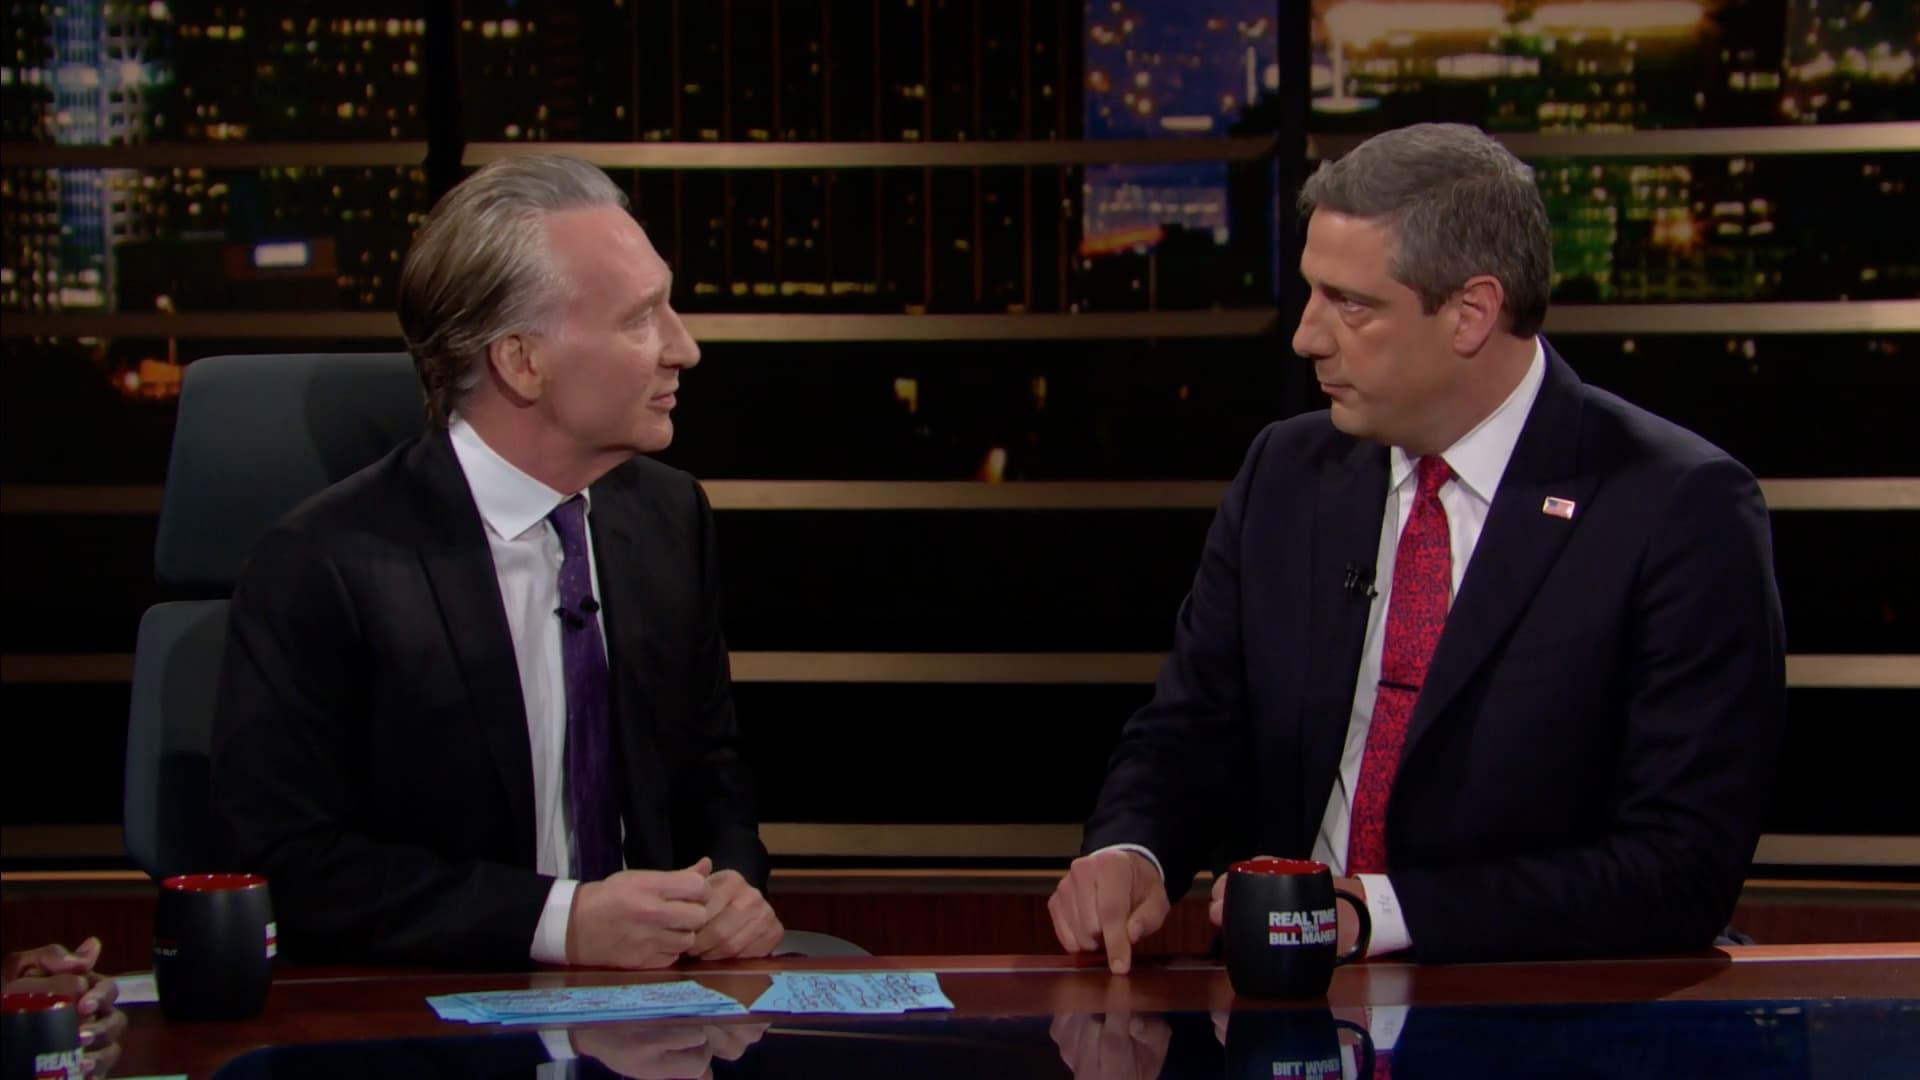 Real Time with Bill Maher (S17E15): Season 17, Episode 15 ...